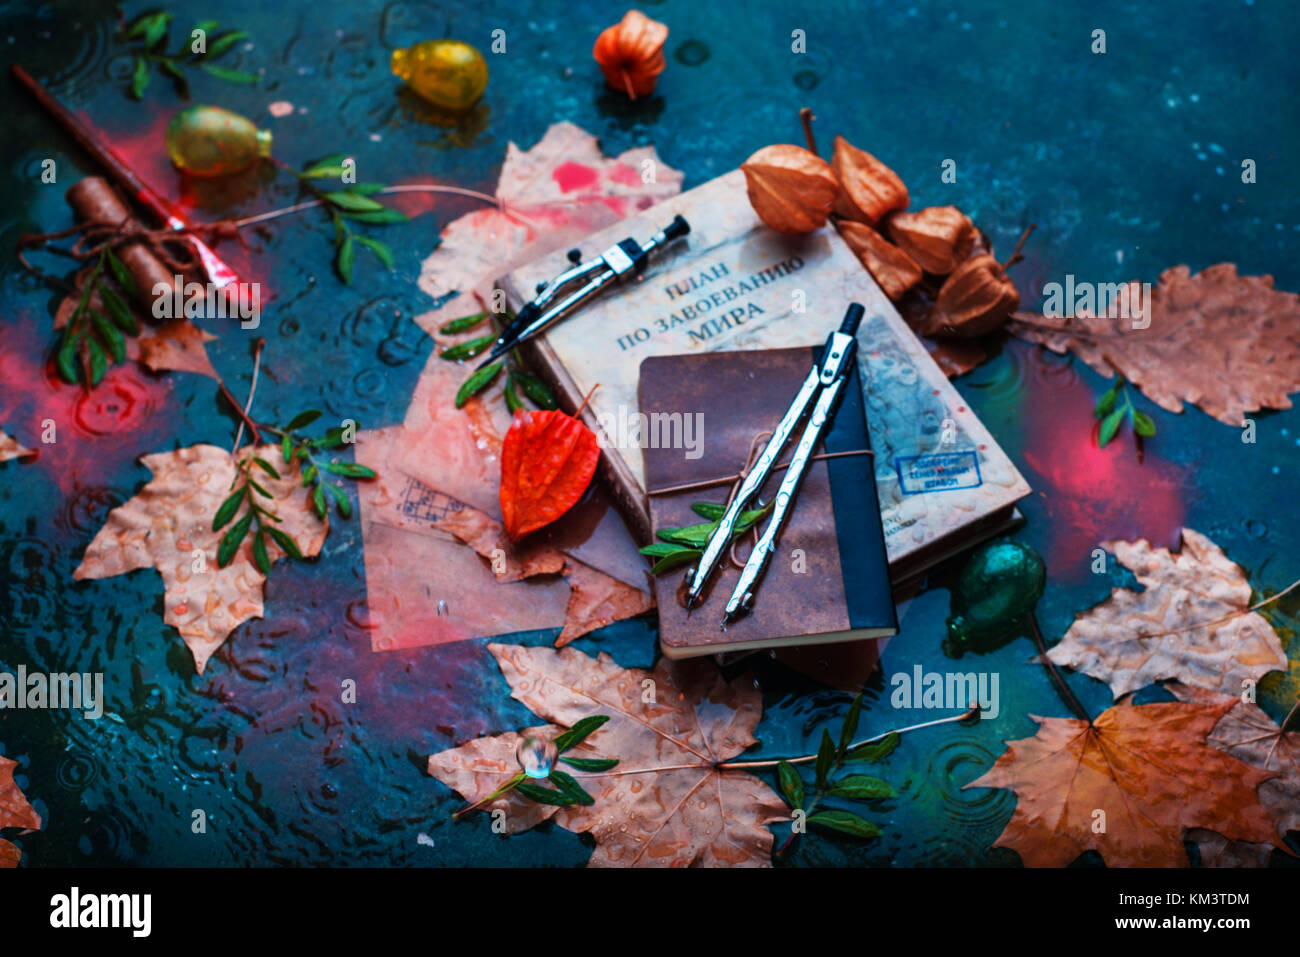 Rainy Autumn Still Life With Books Fallen Leaves Drawing Compasses Stock Photo Alamy